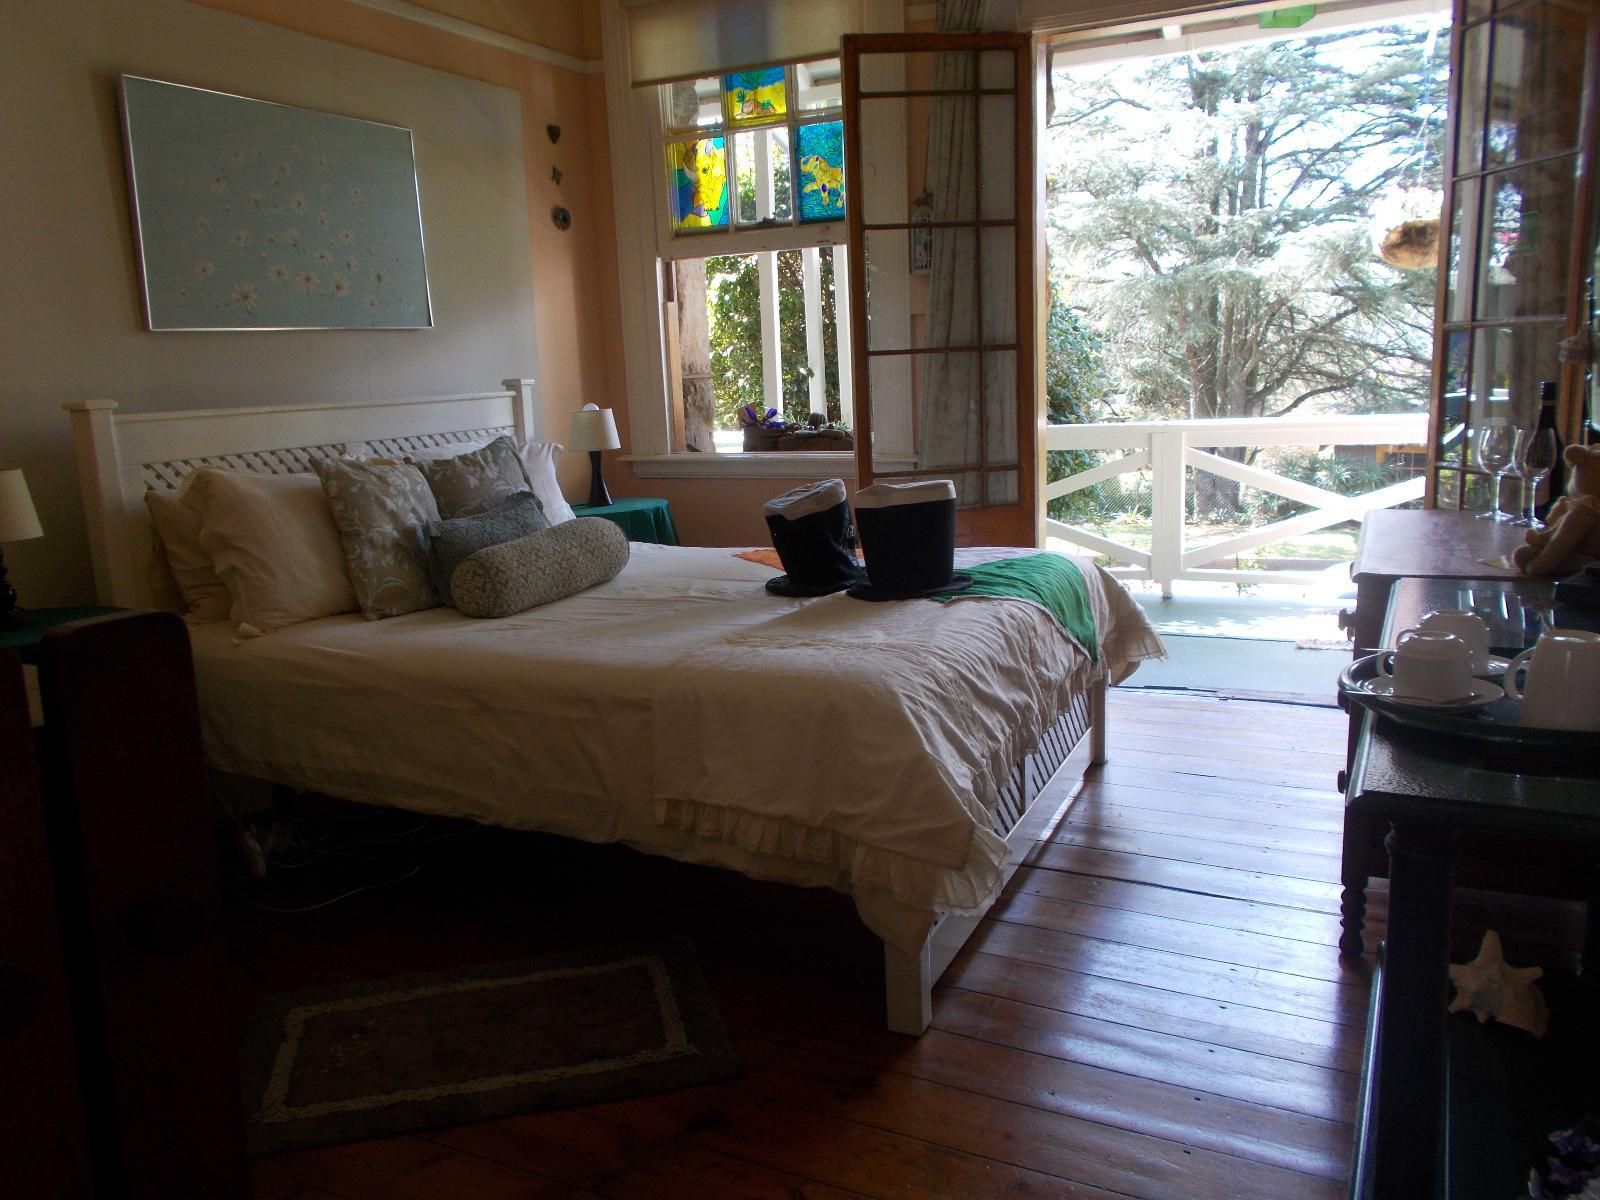 Shamrock Arms Guest Lodge Waterval Boven Mpumalanga South Africa Window, Architecture, Bedroom